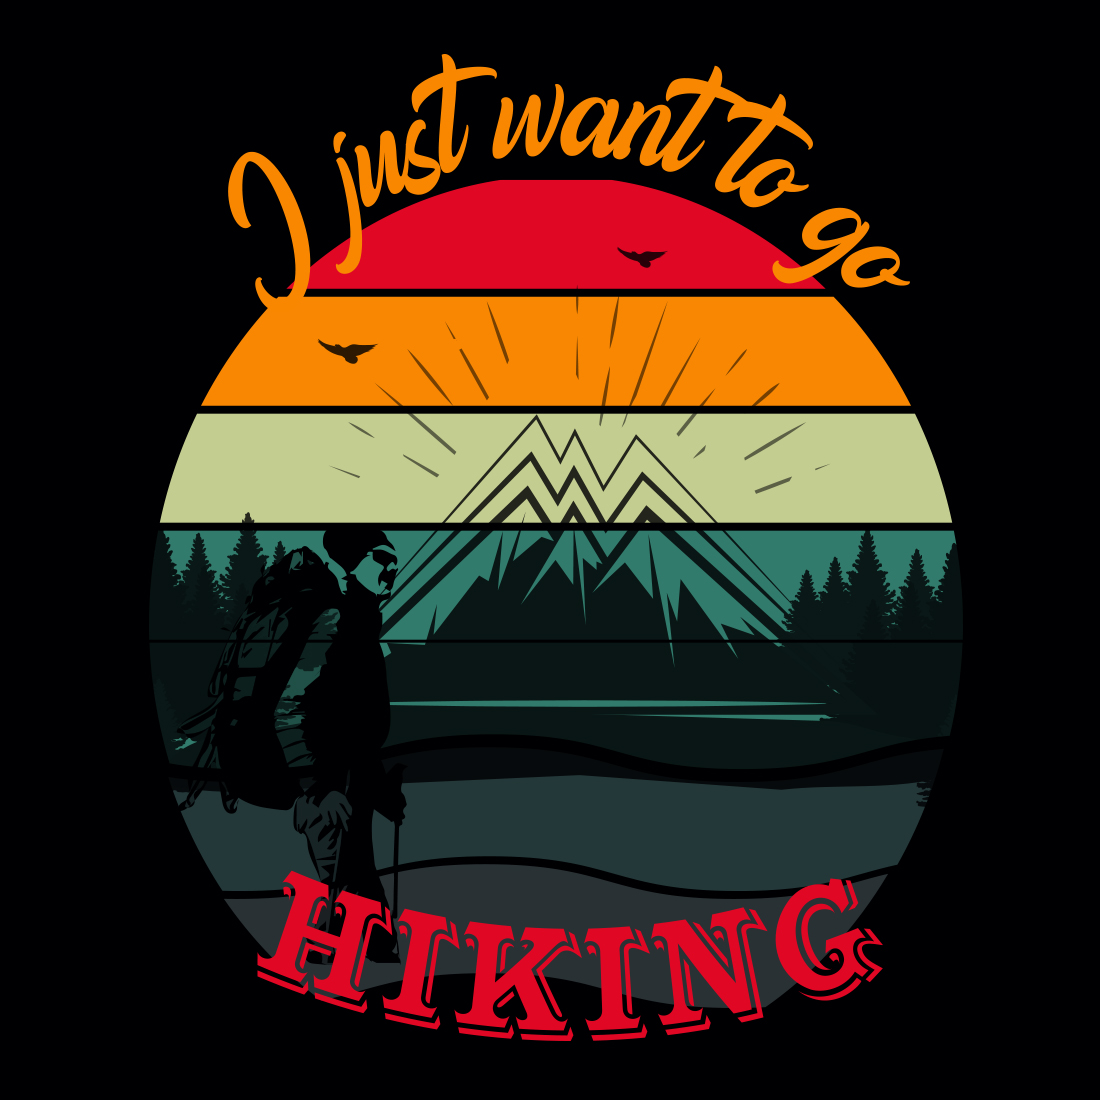 I just want to go hiking preview image.